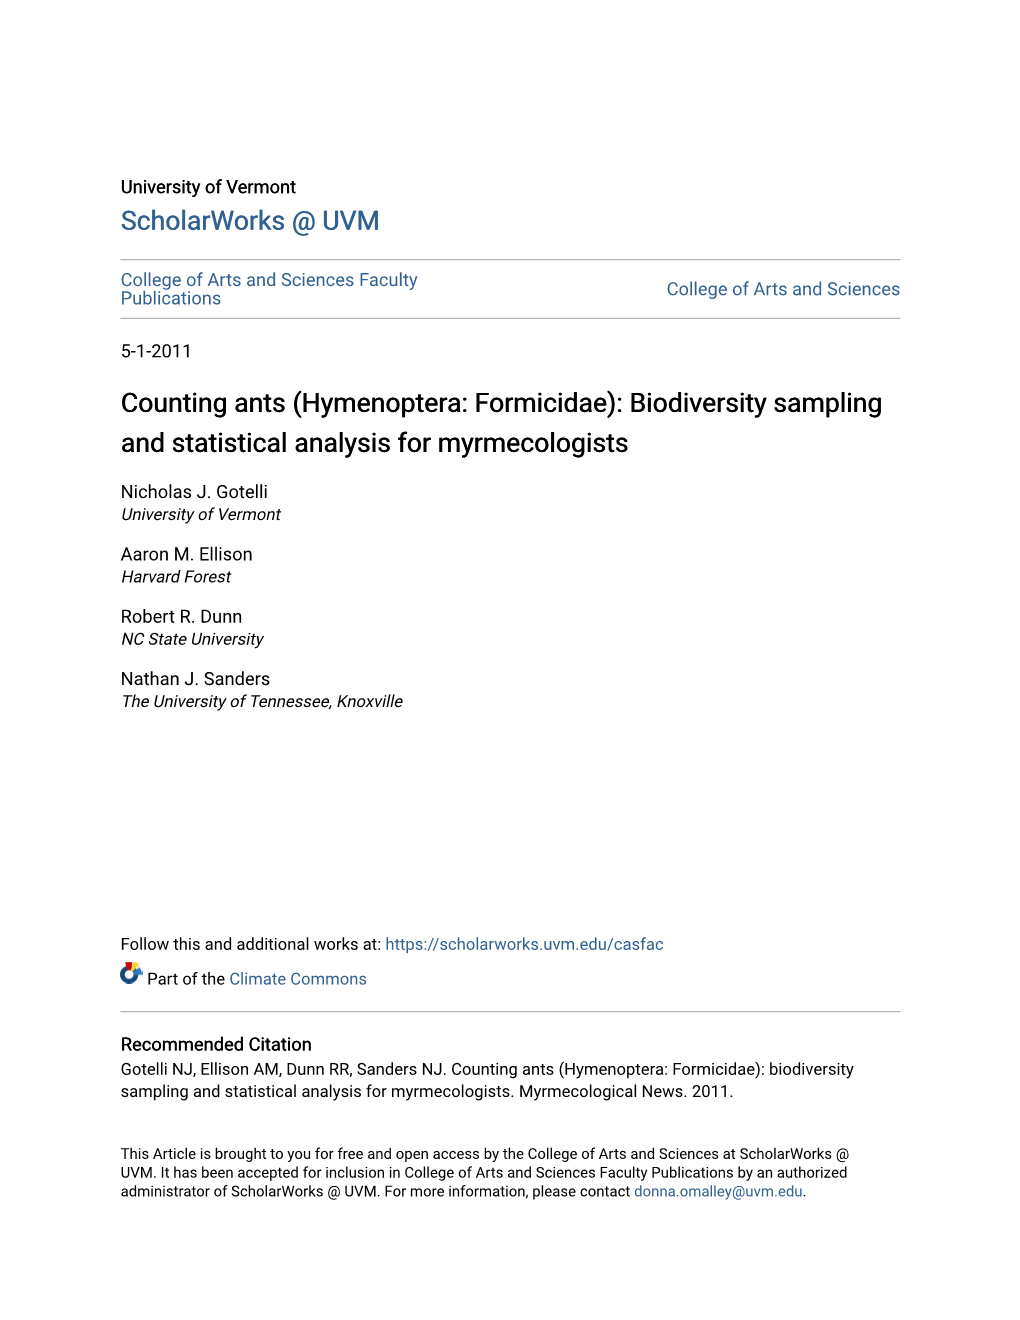 Biodiversity Sampling and Statistical Analysis for Myrmecologists